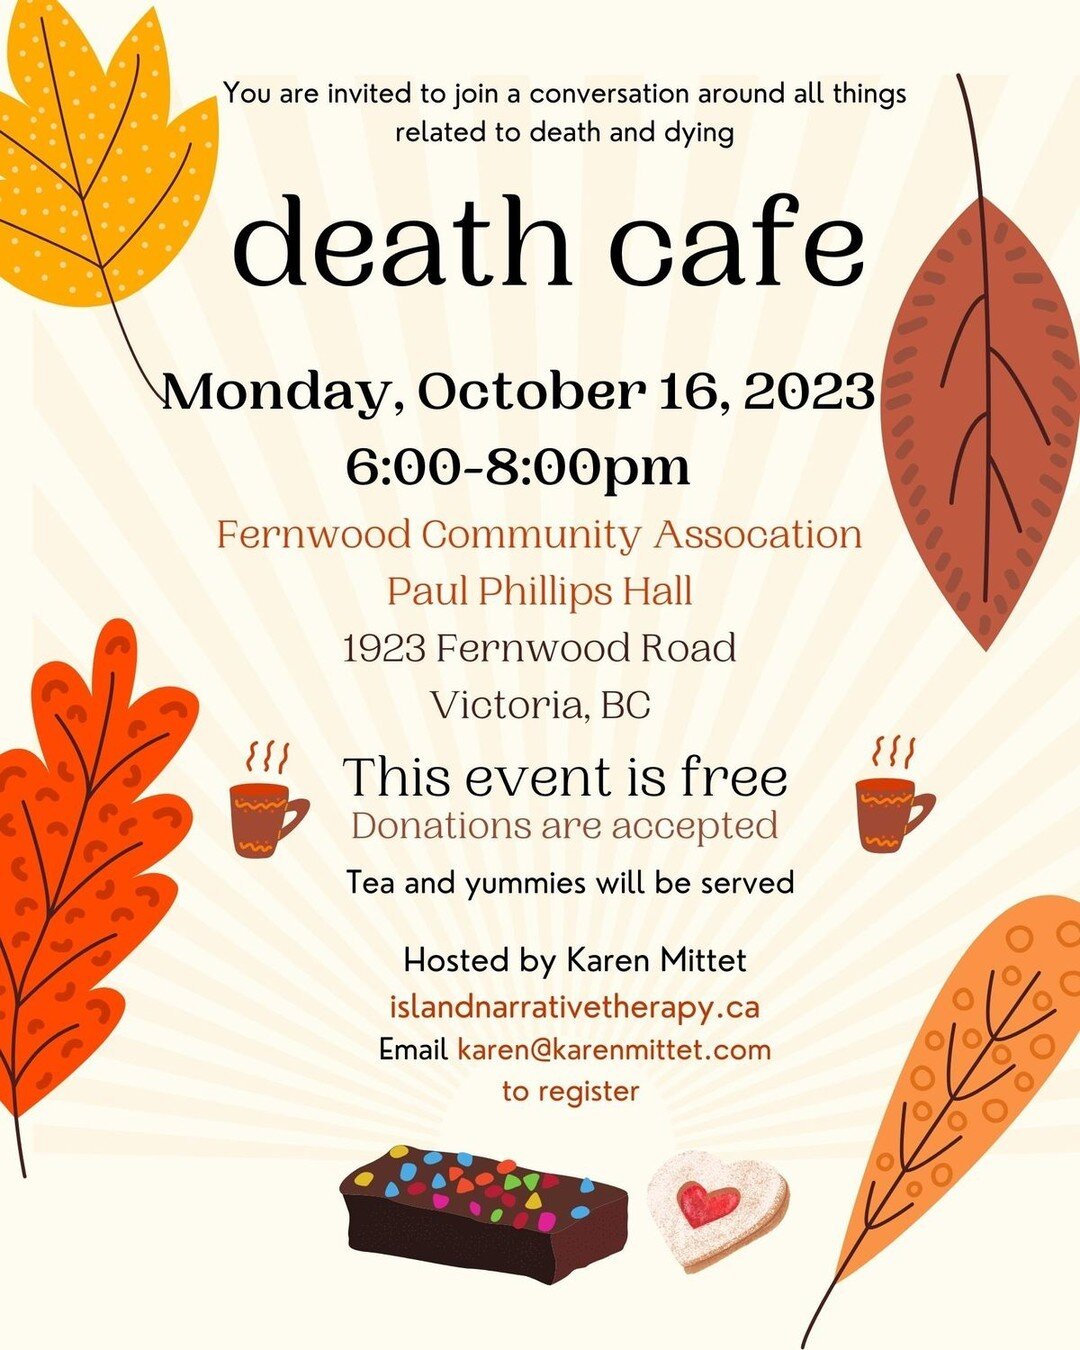 There has been a change in date for the next Death Cafe.  Please note that it is now on Monday, October 16, 2023 6:00-8:00pm.  I hope you are able to attend.  #deathcafe #deathtalk #deathconversations#normalizingdeathgriefdying
#healthydialogue